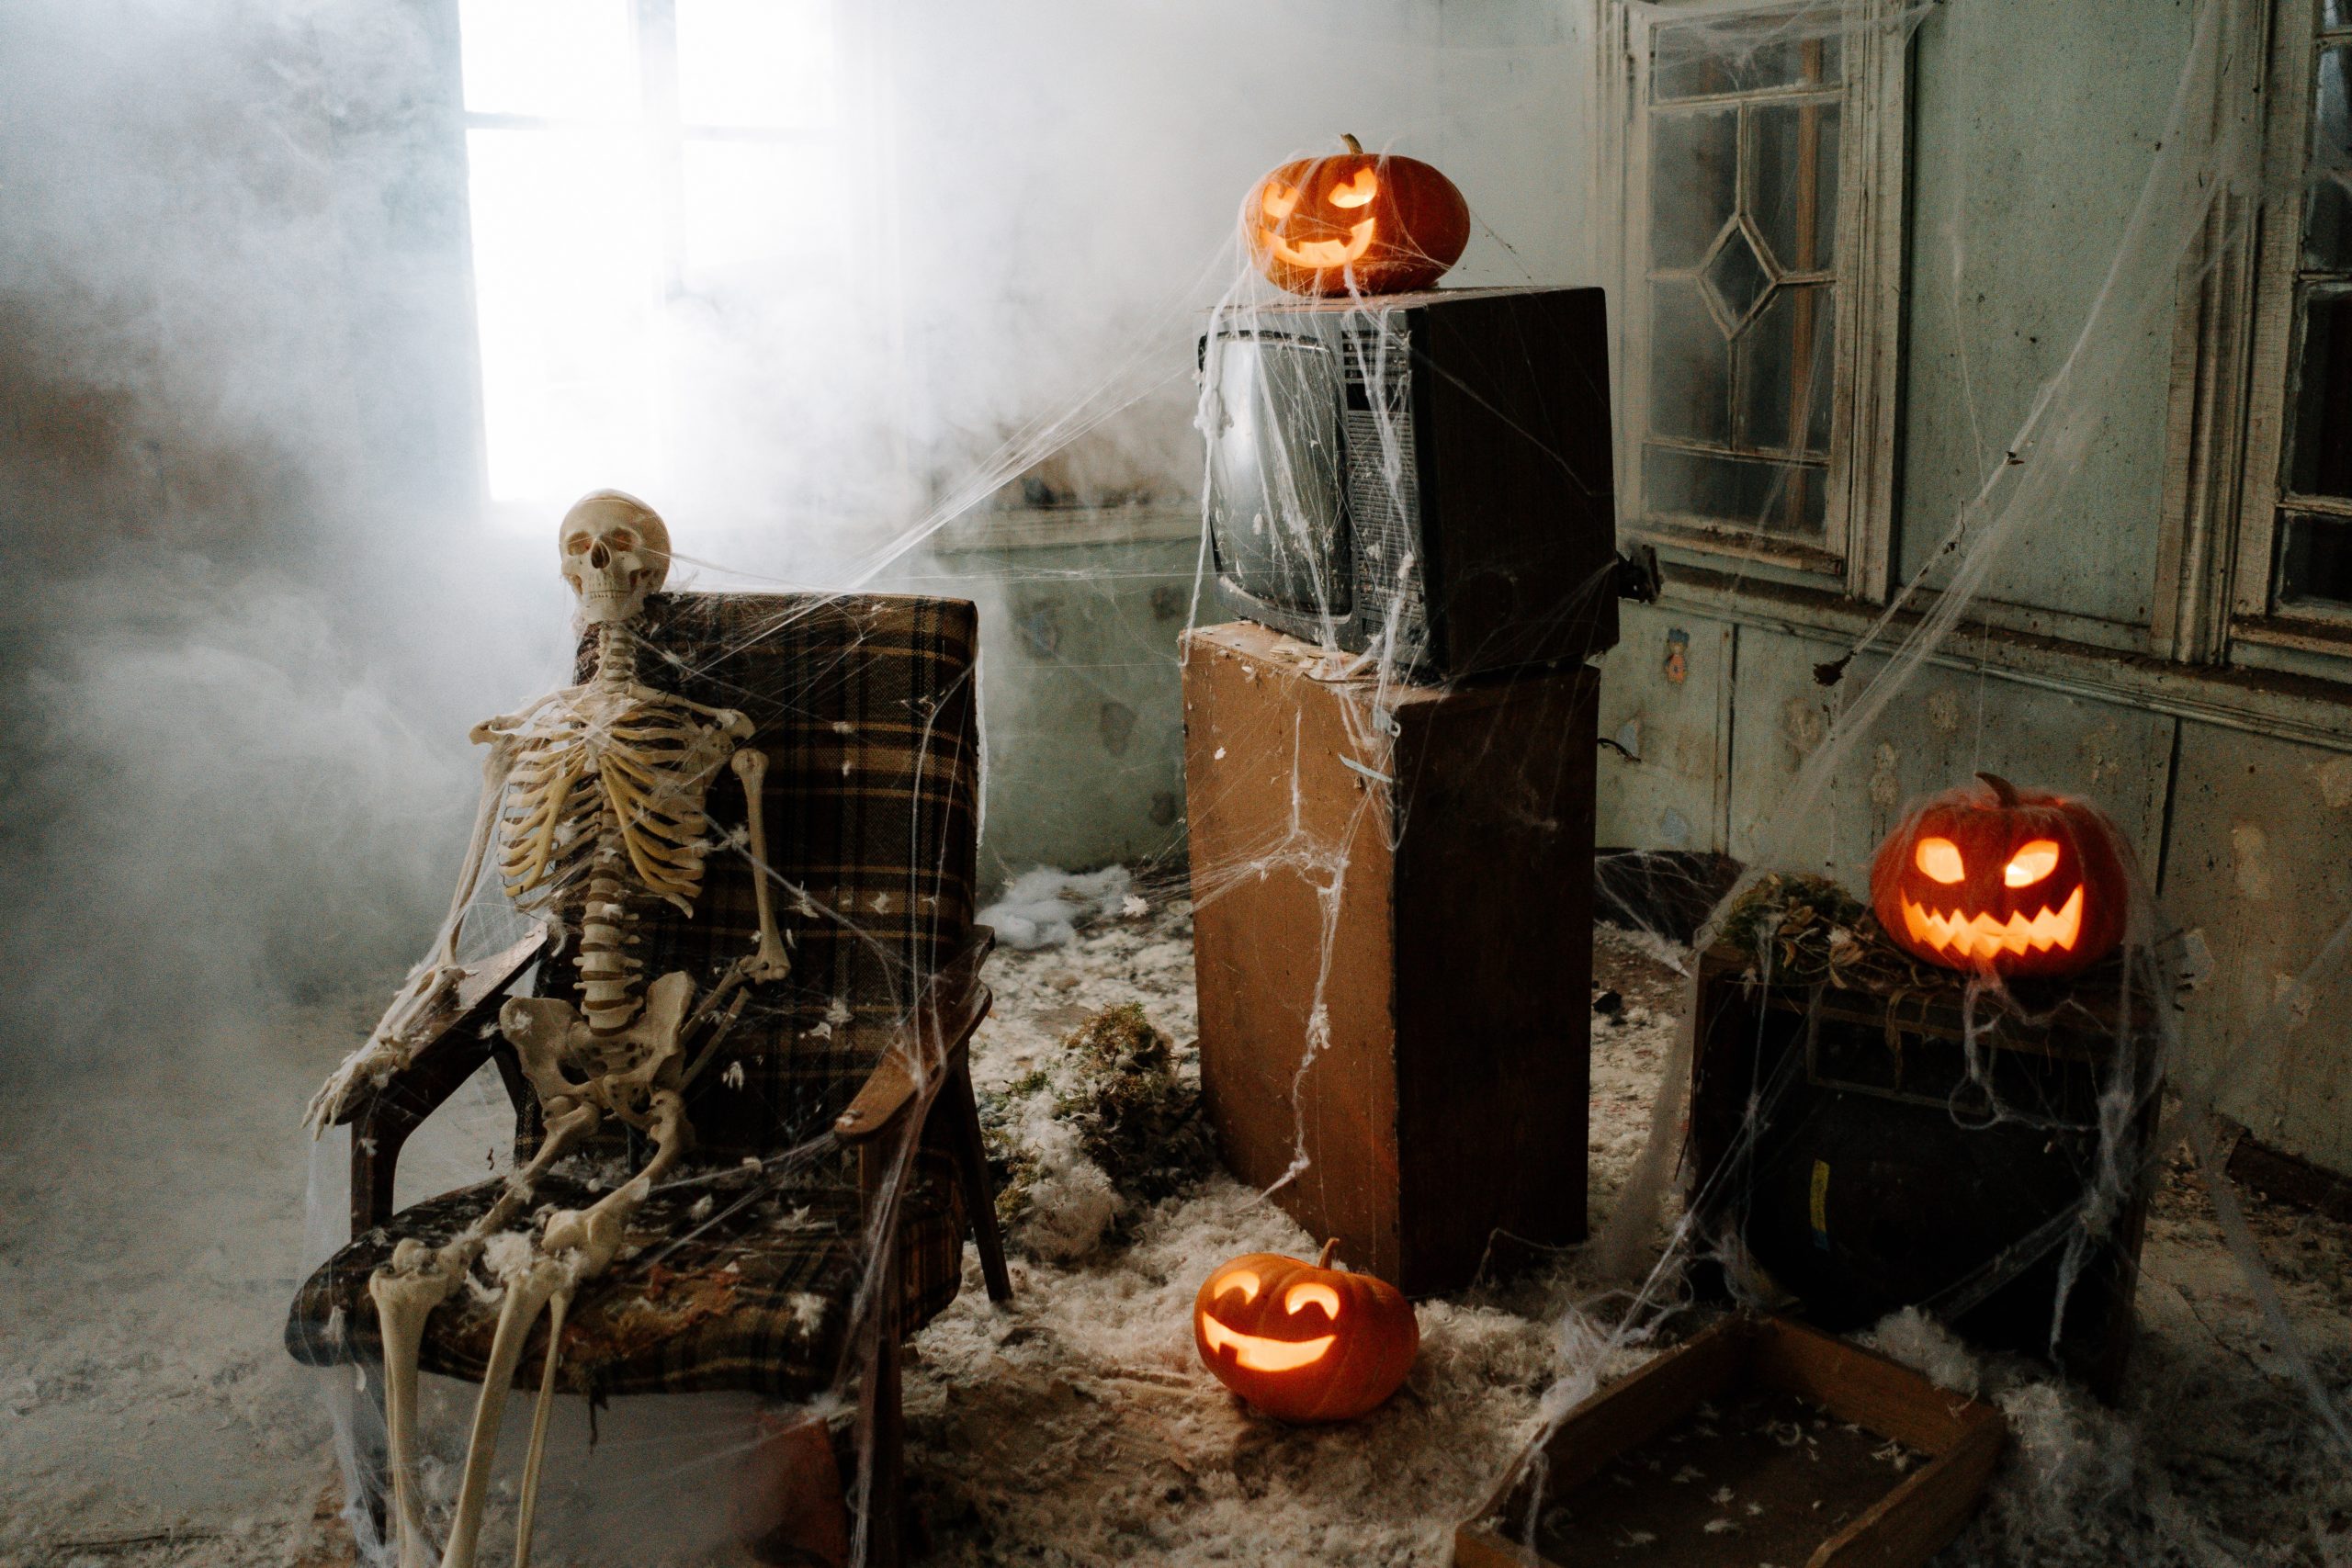 Room decorated with halloween elements and smoke from the smoke machine